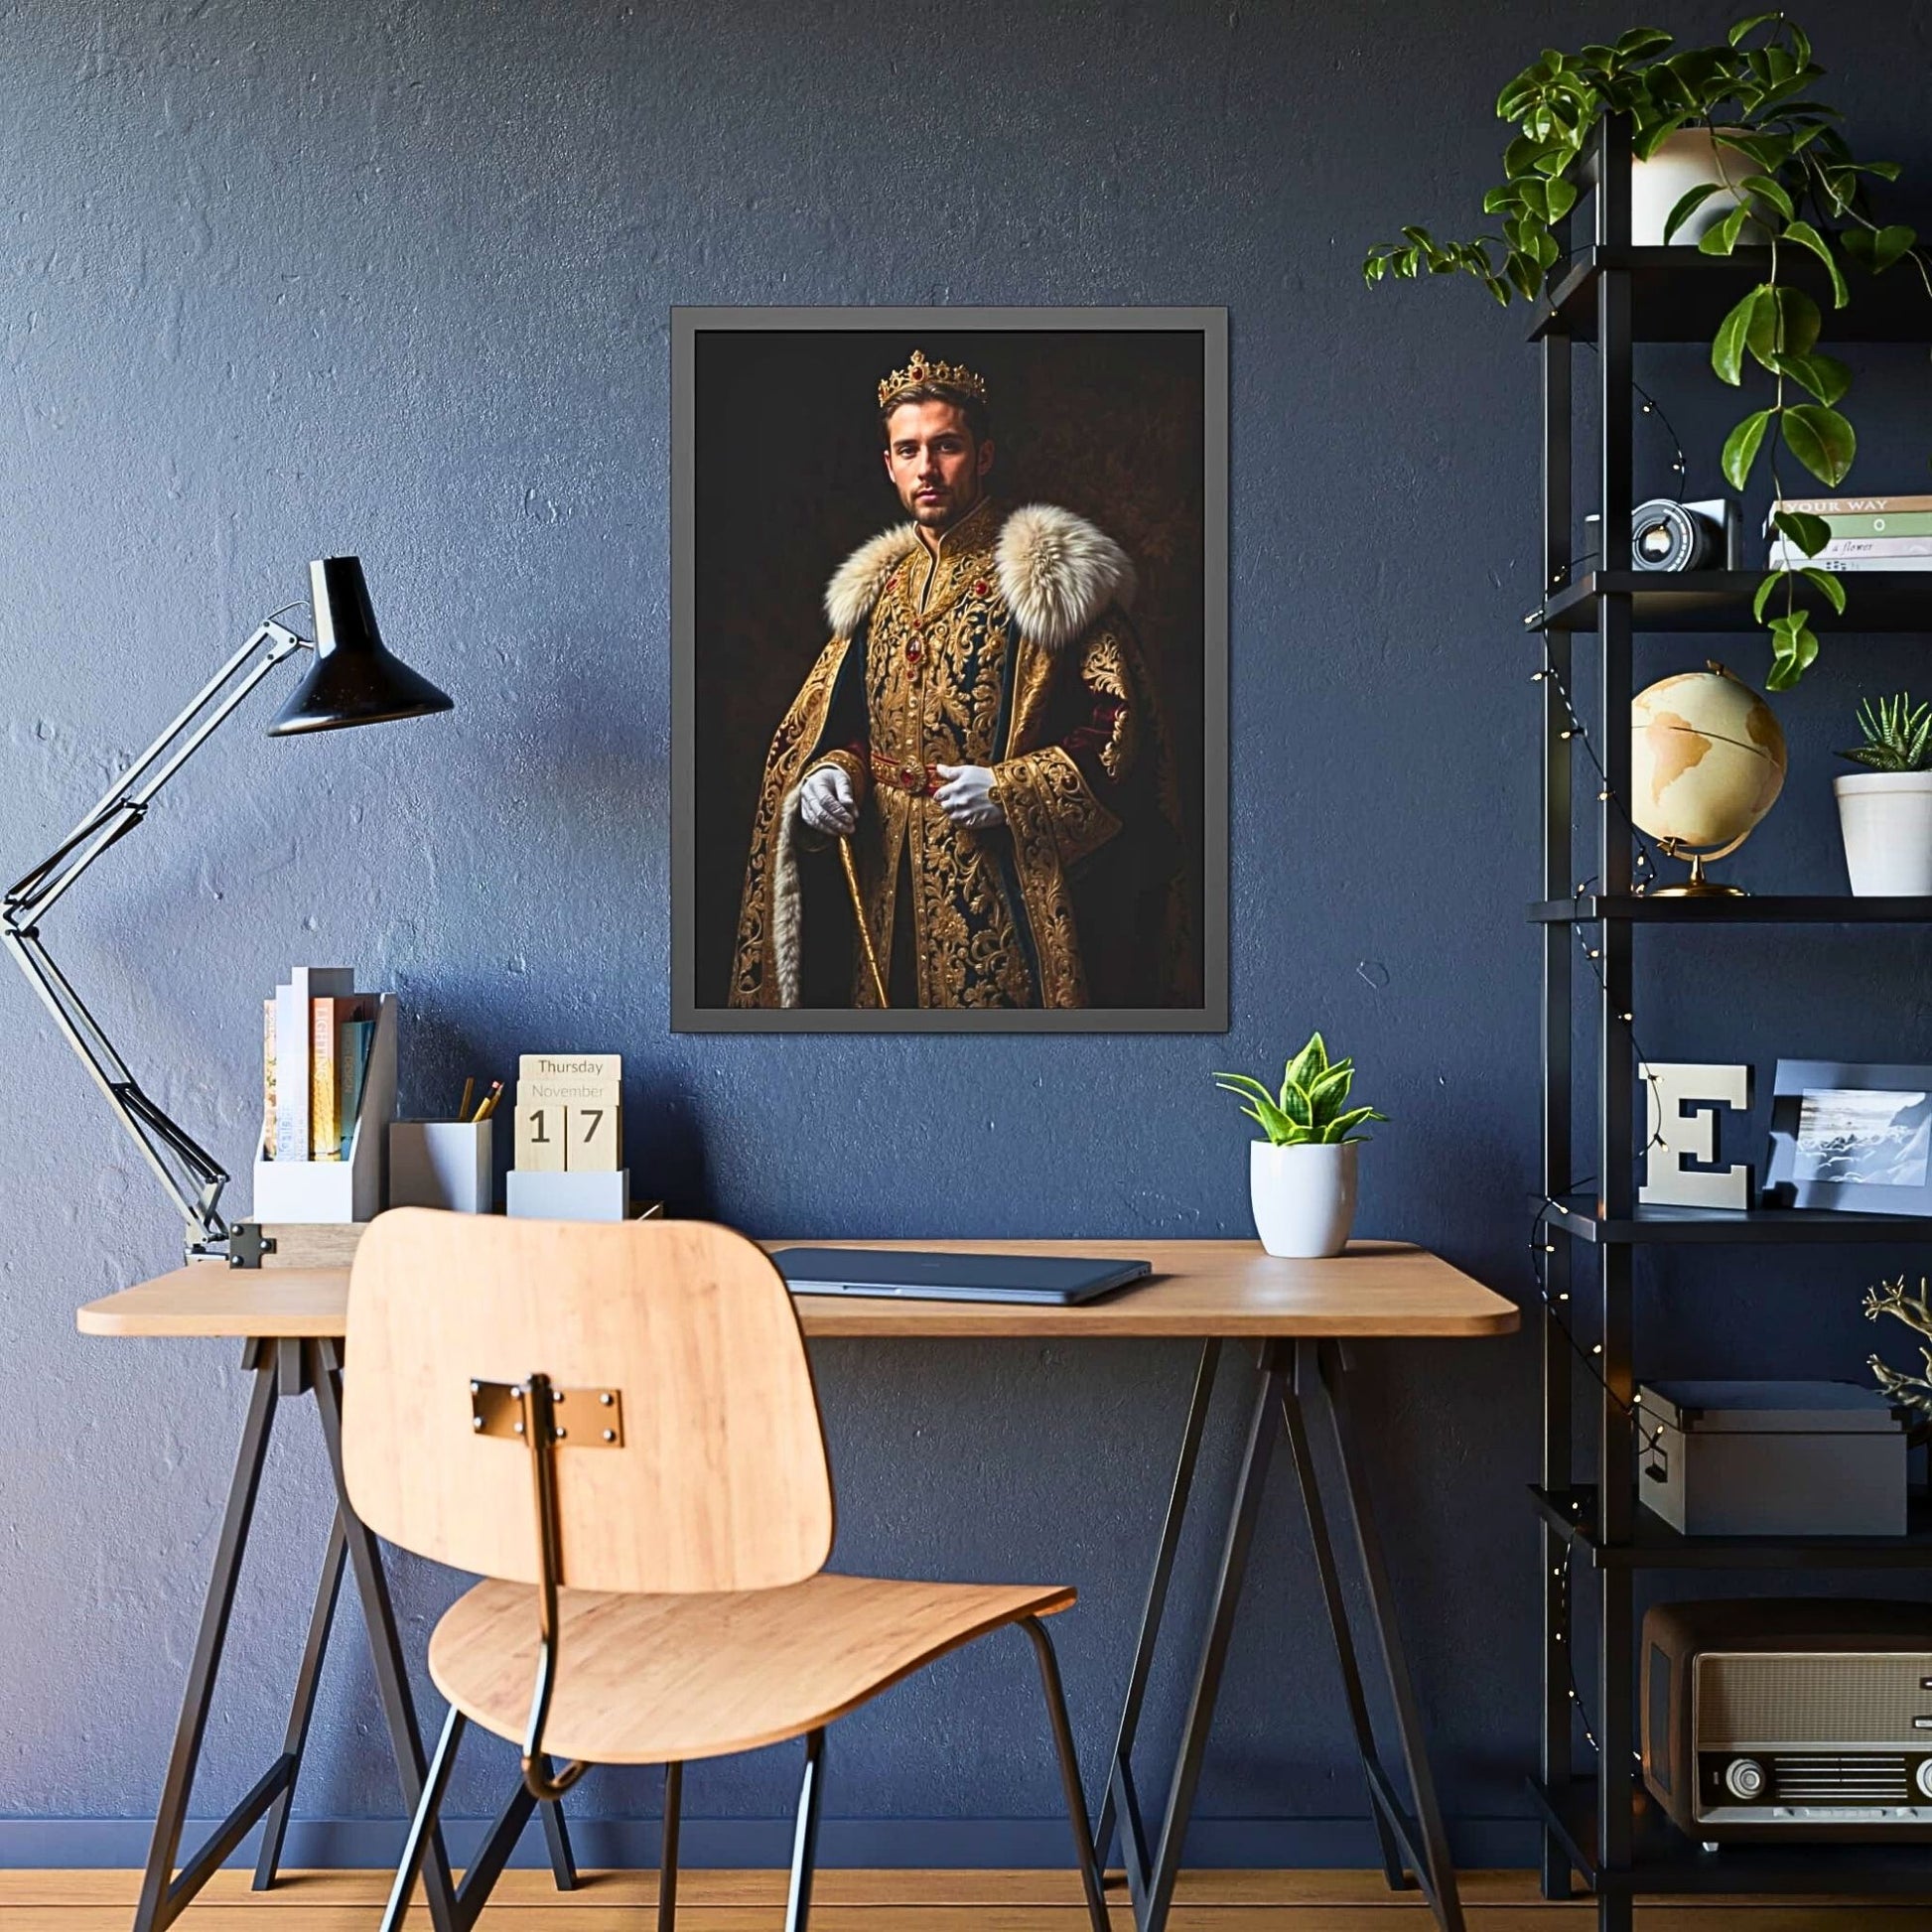 Create a personalized royal portrait from a photo, featuring a Renaissance style and historical flair. Perfect for birthdays and special occasions, this custom king portrait makes an unforgettable gift for him. Digital download available.